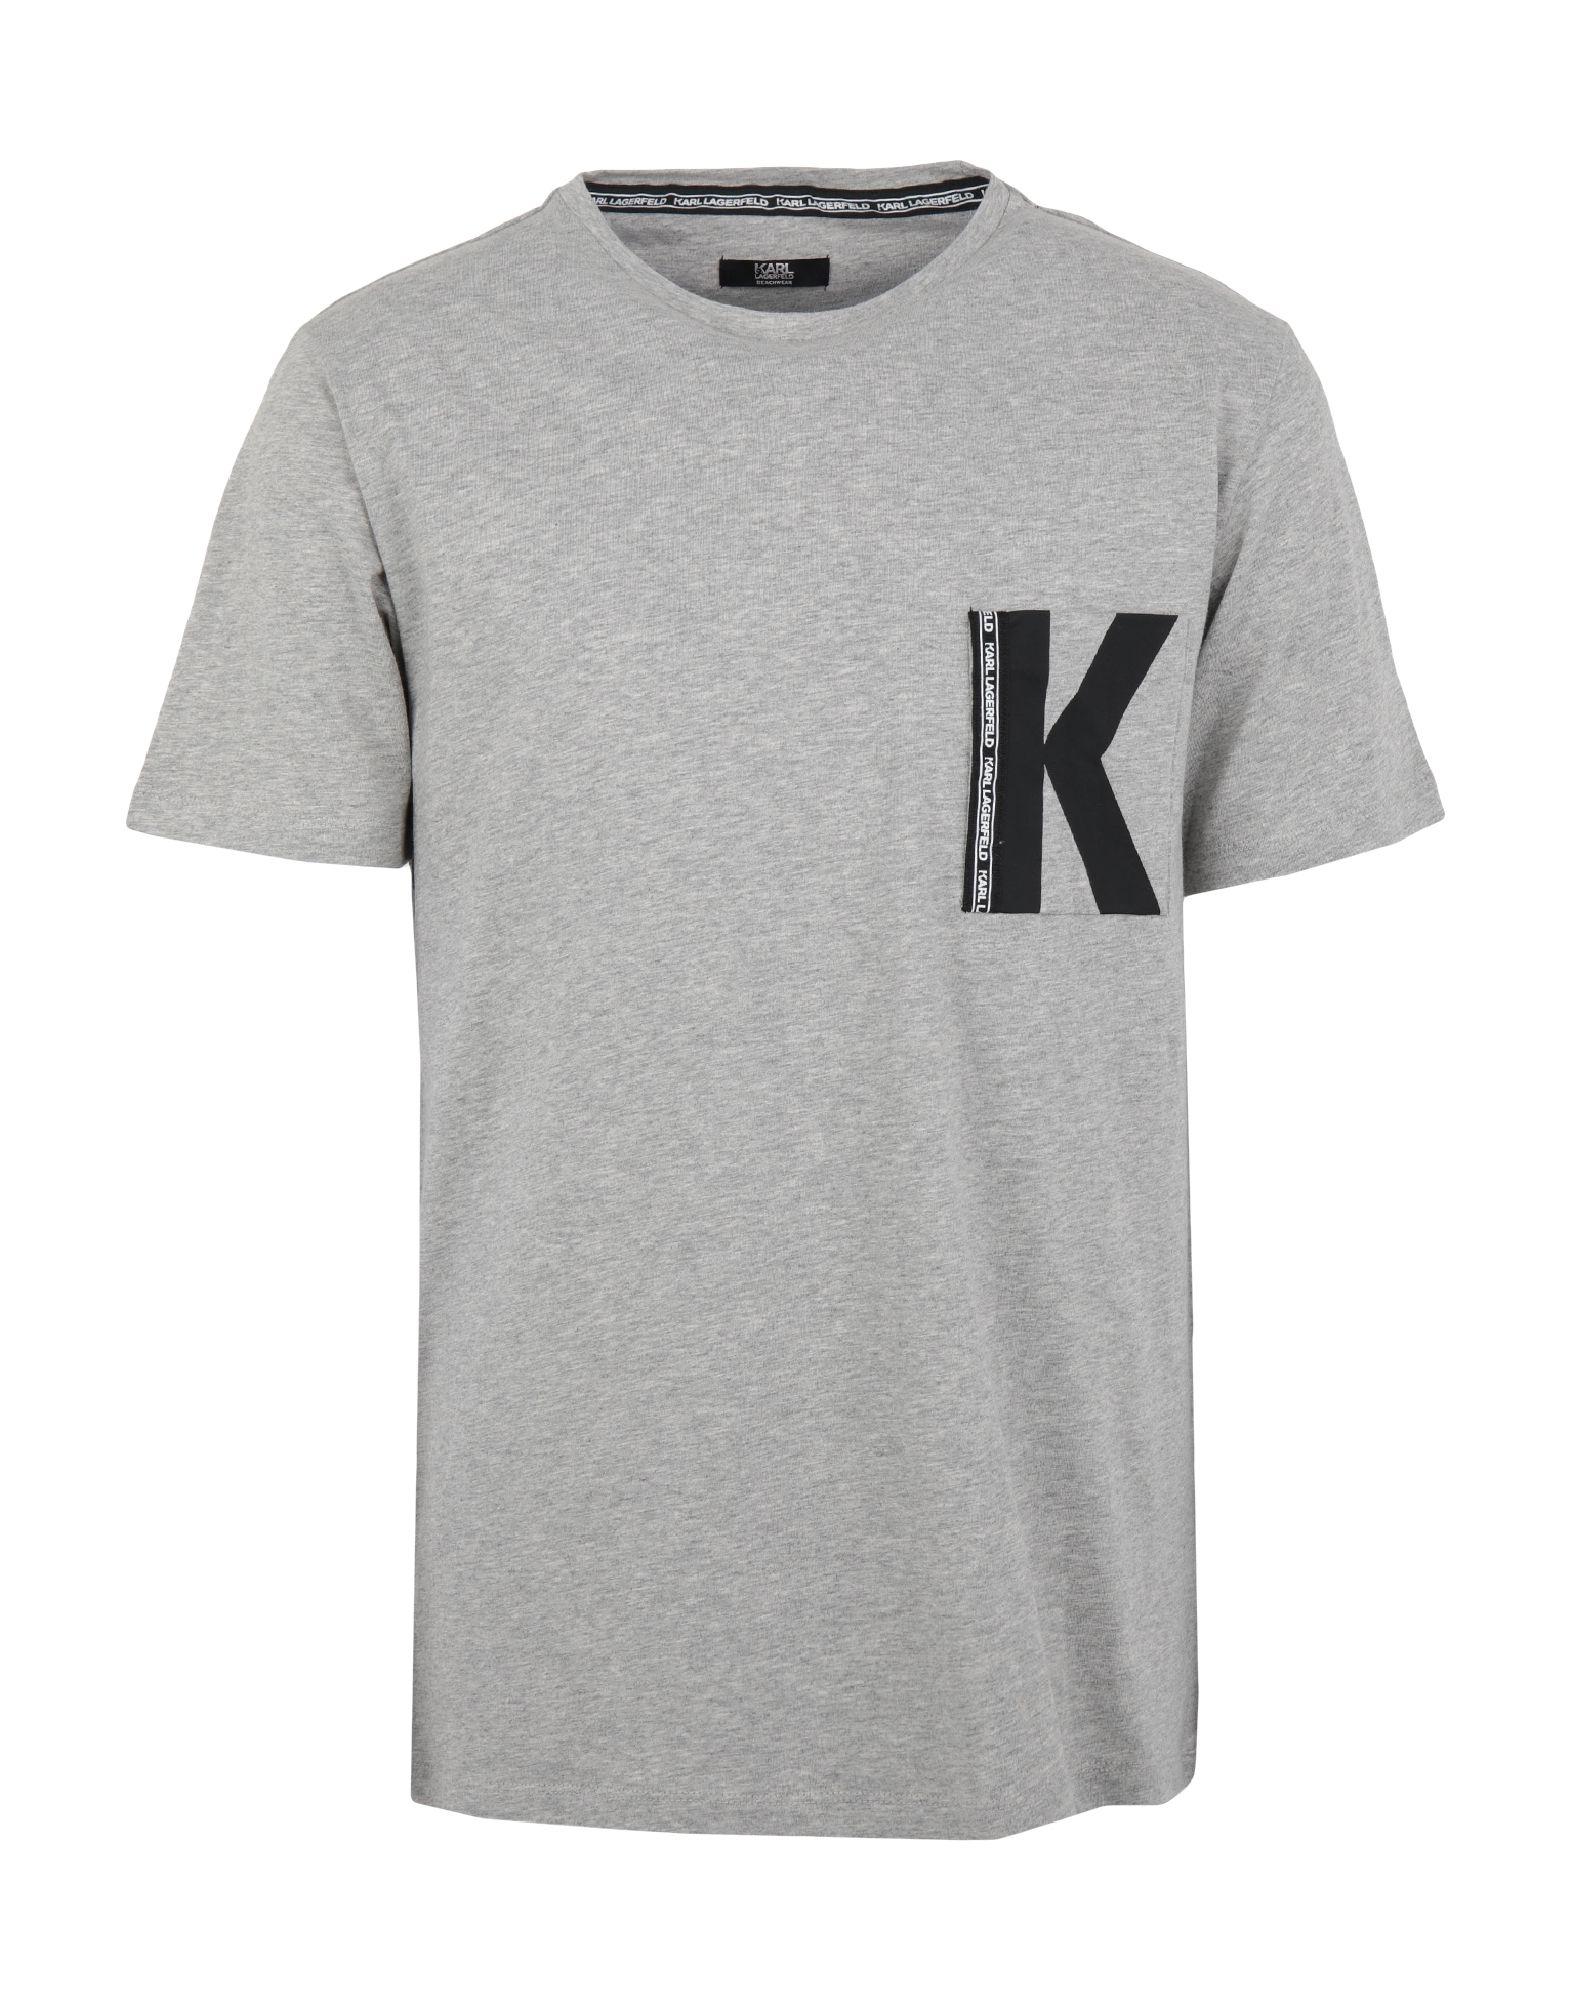 Karl Lagerfeld Cotton T-shirt in Grey (Gray) for Men - Lyst